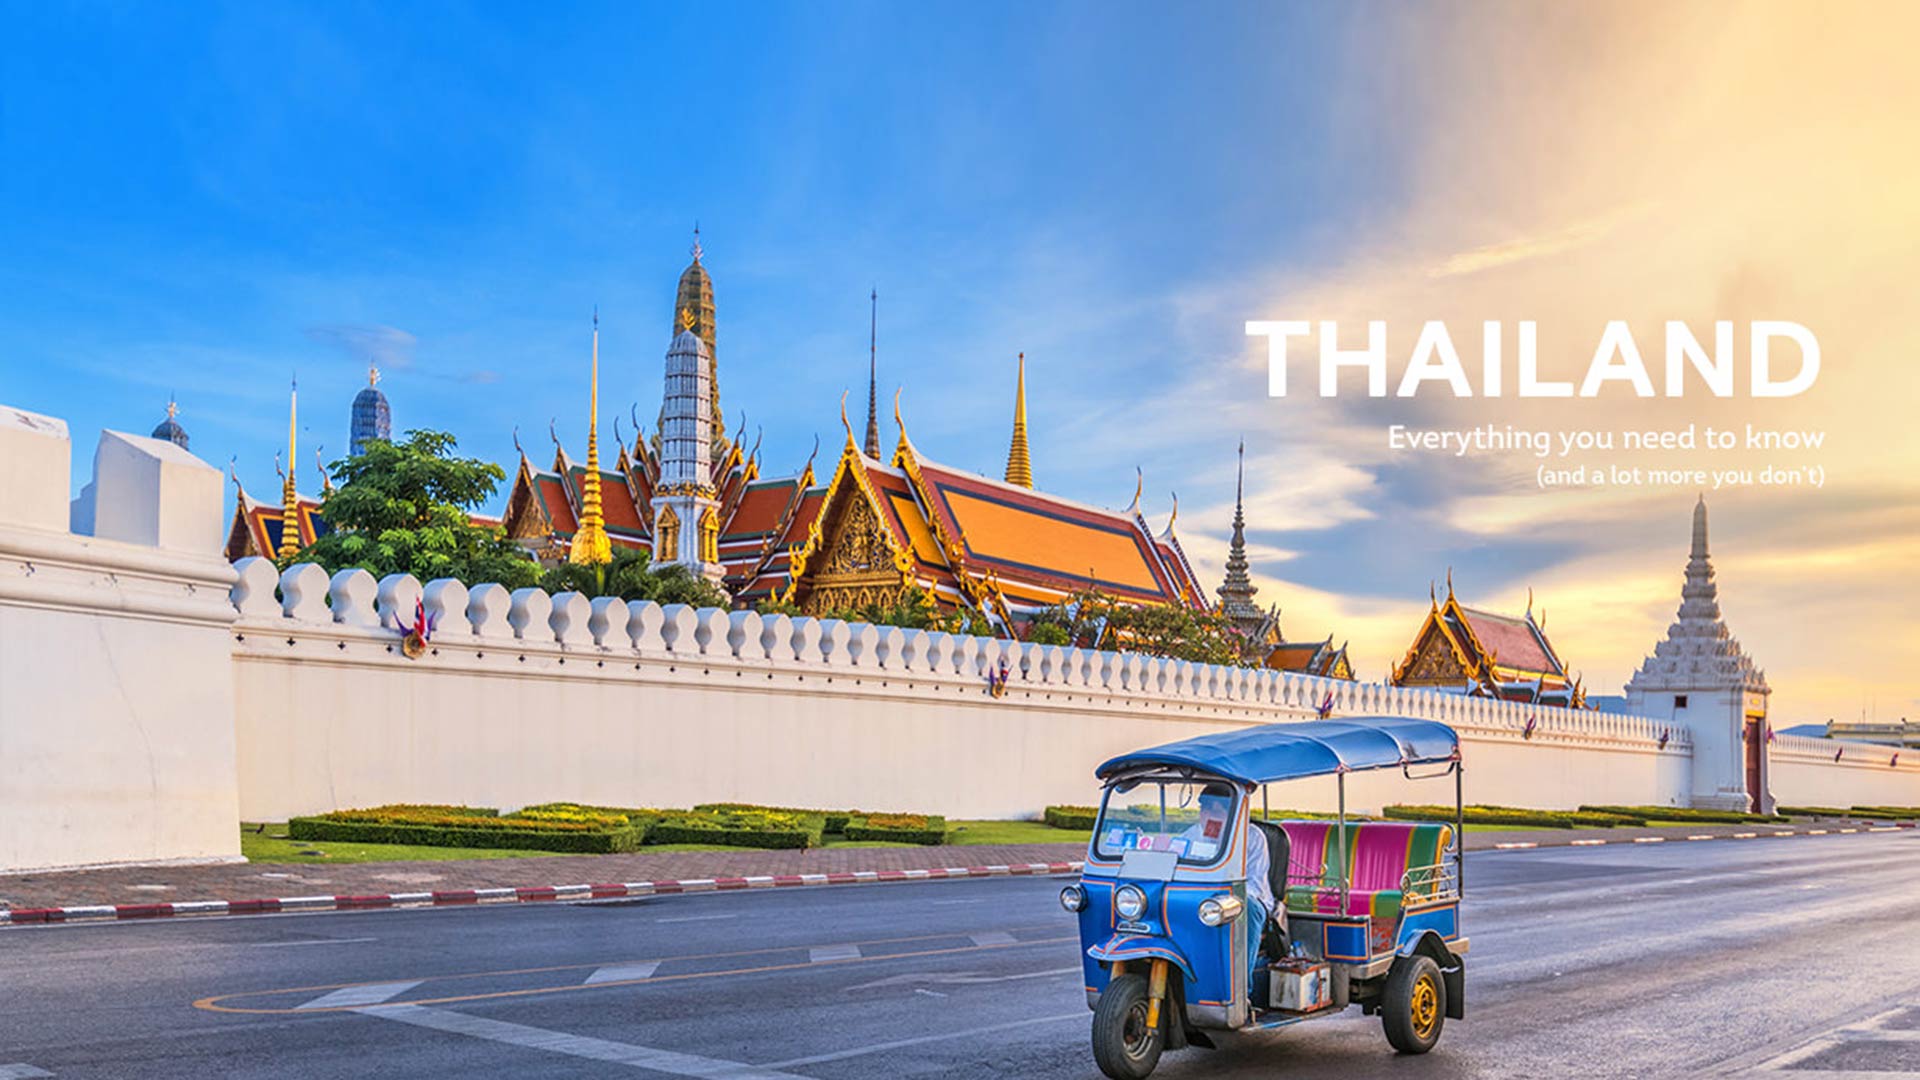 Bangkok Is The Most Visited City In The World